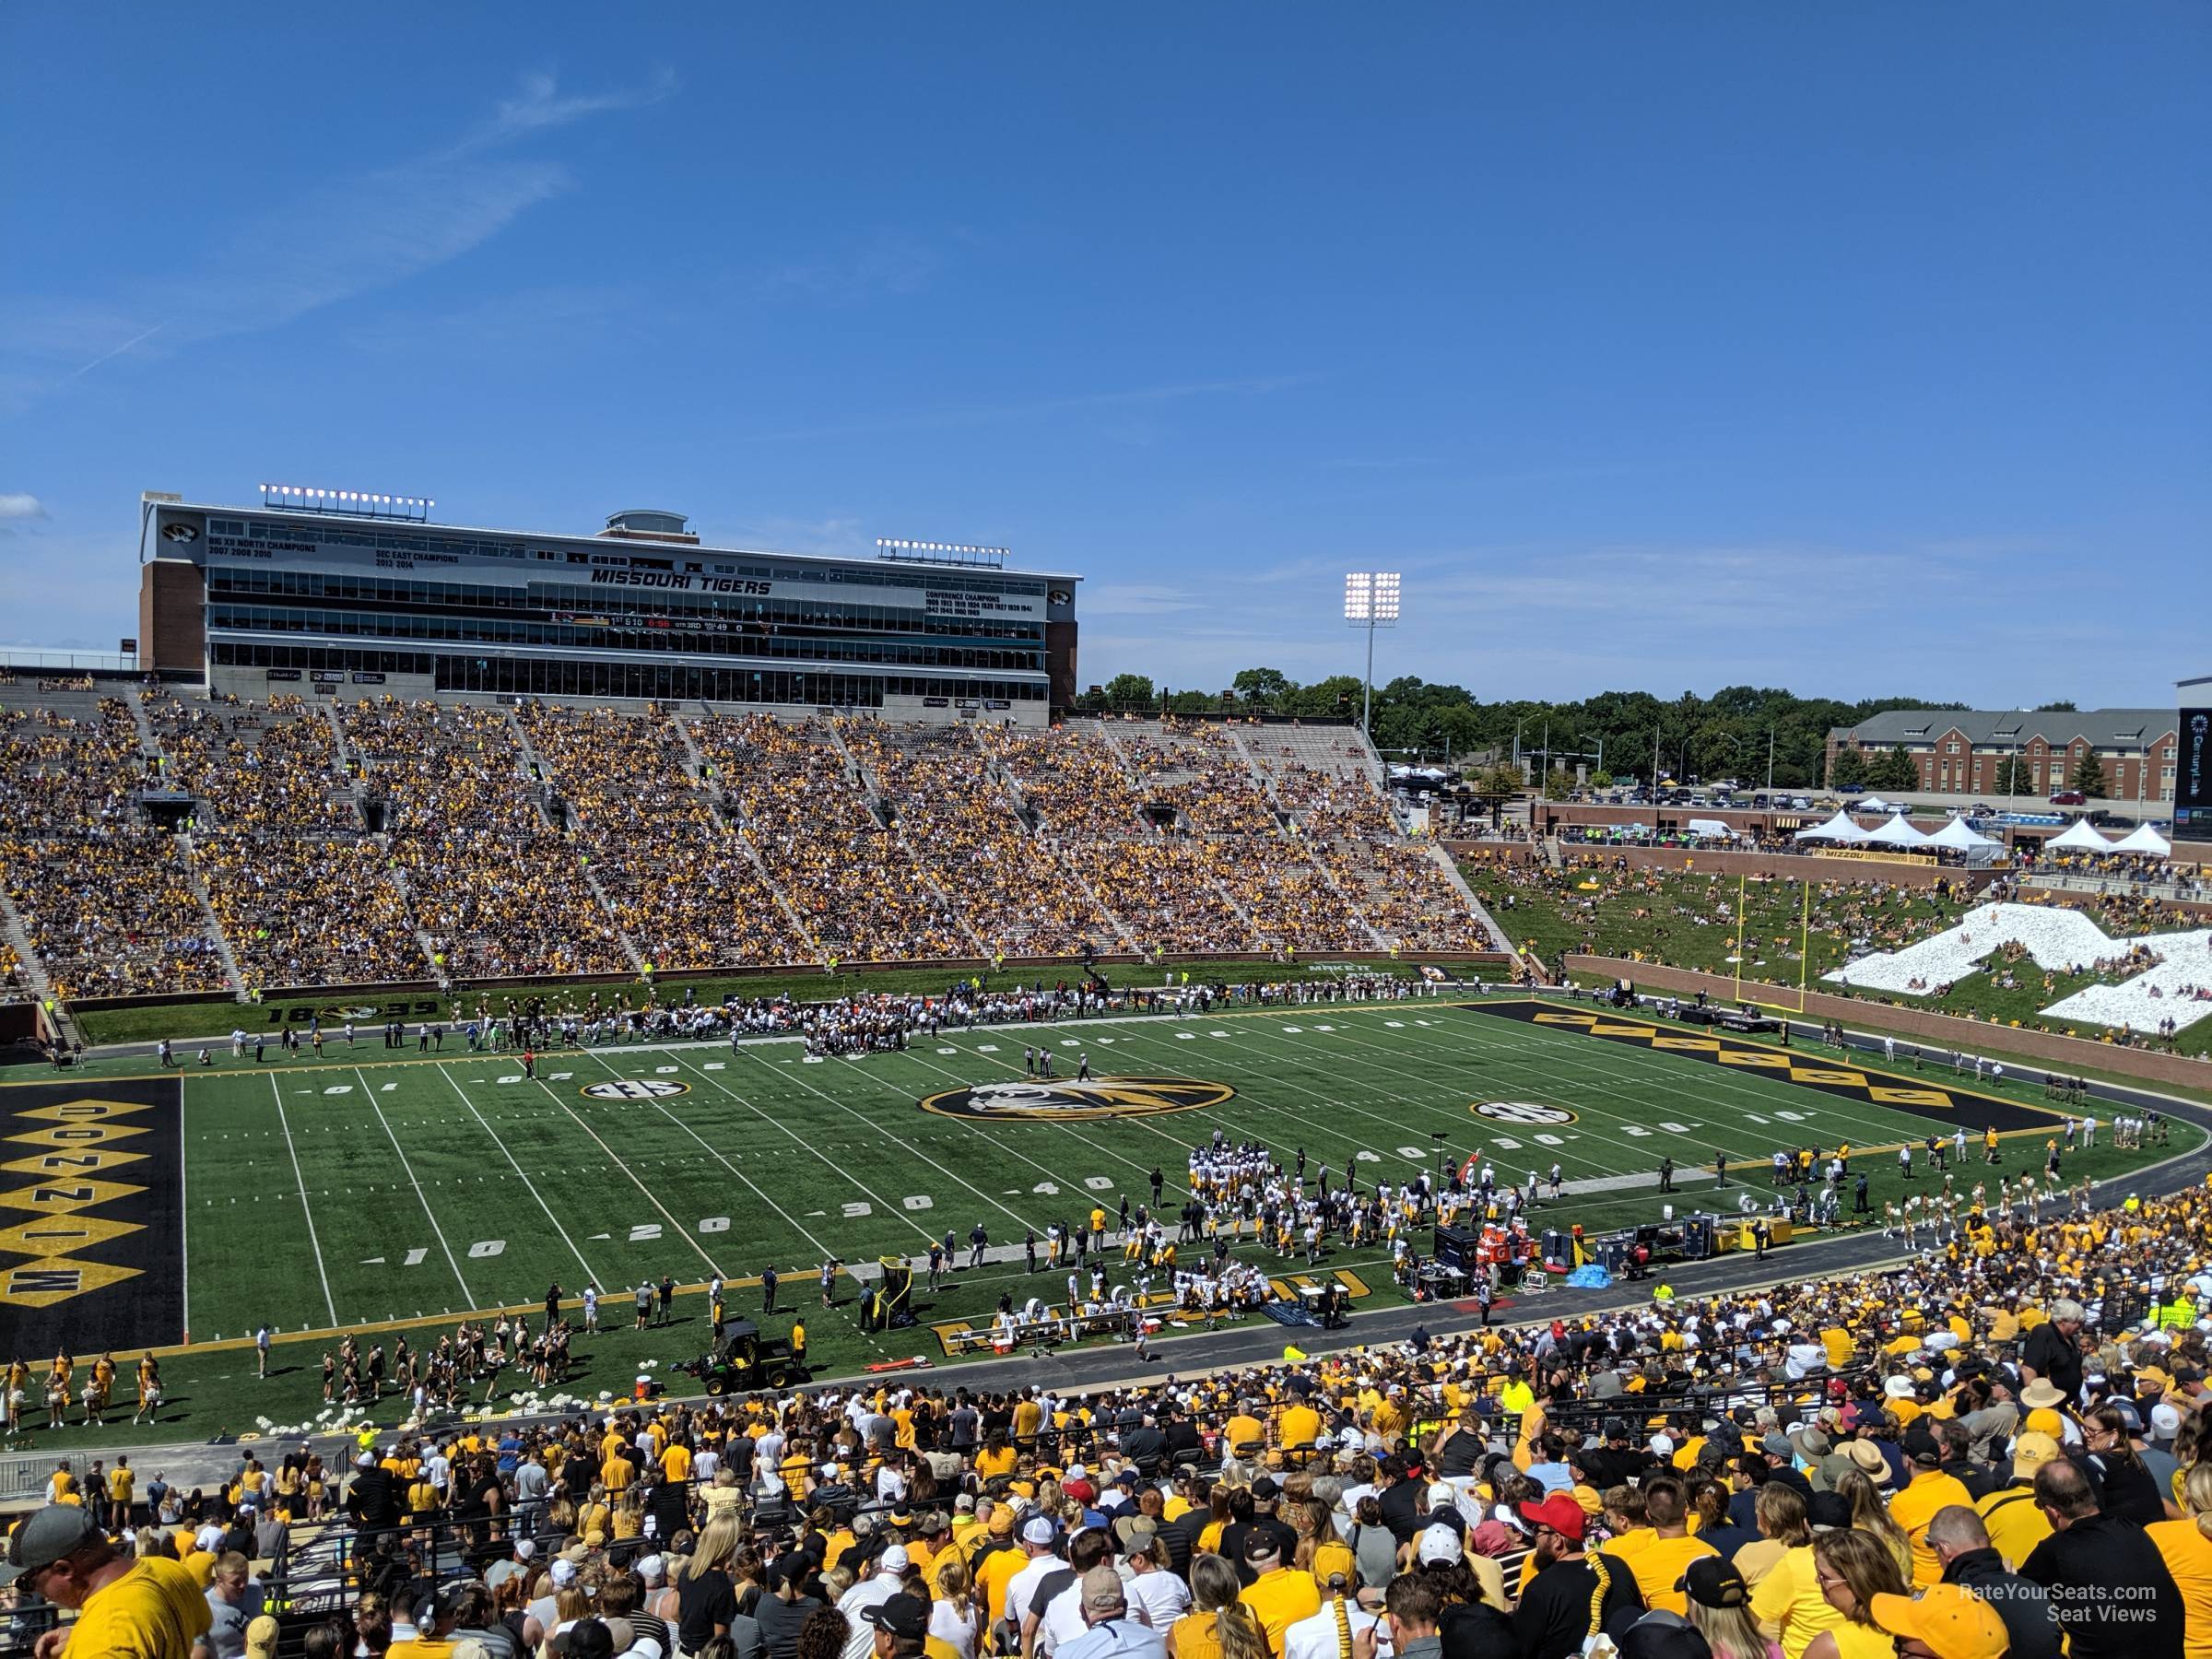 section 205 seat view  - faurot field